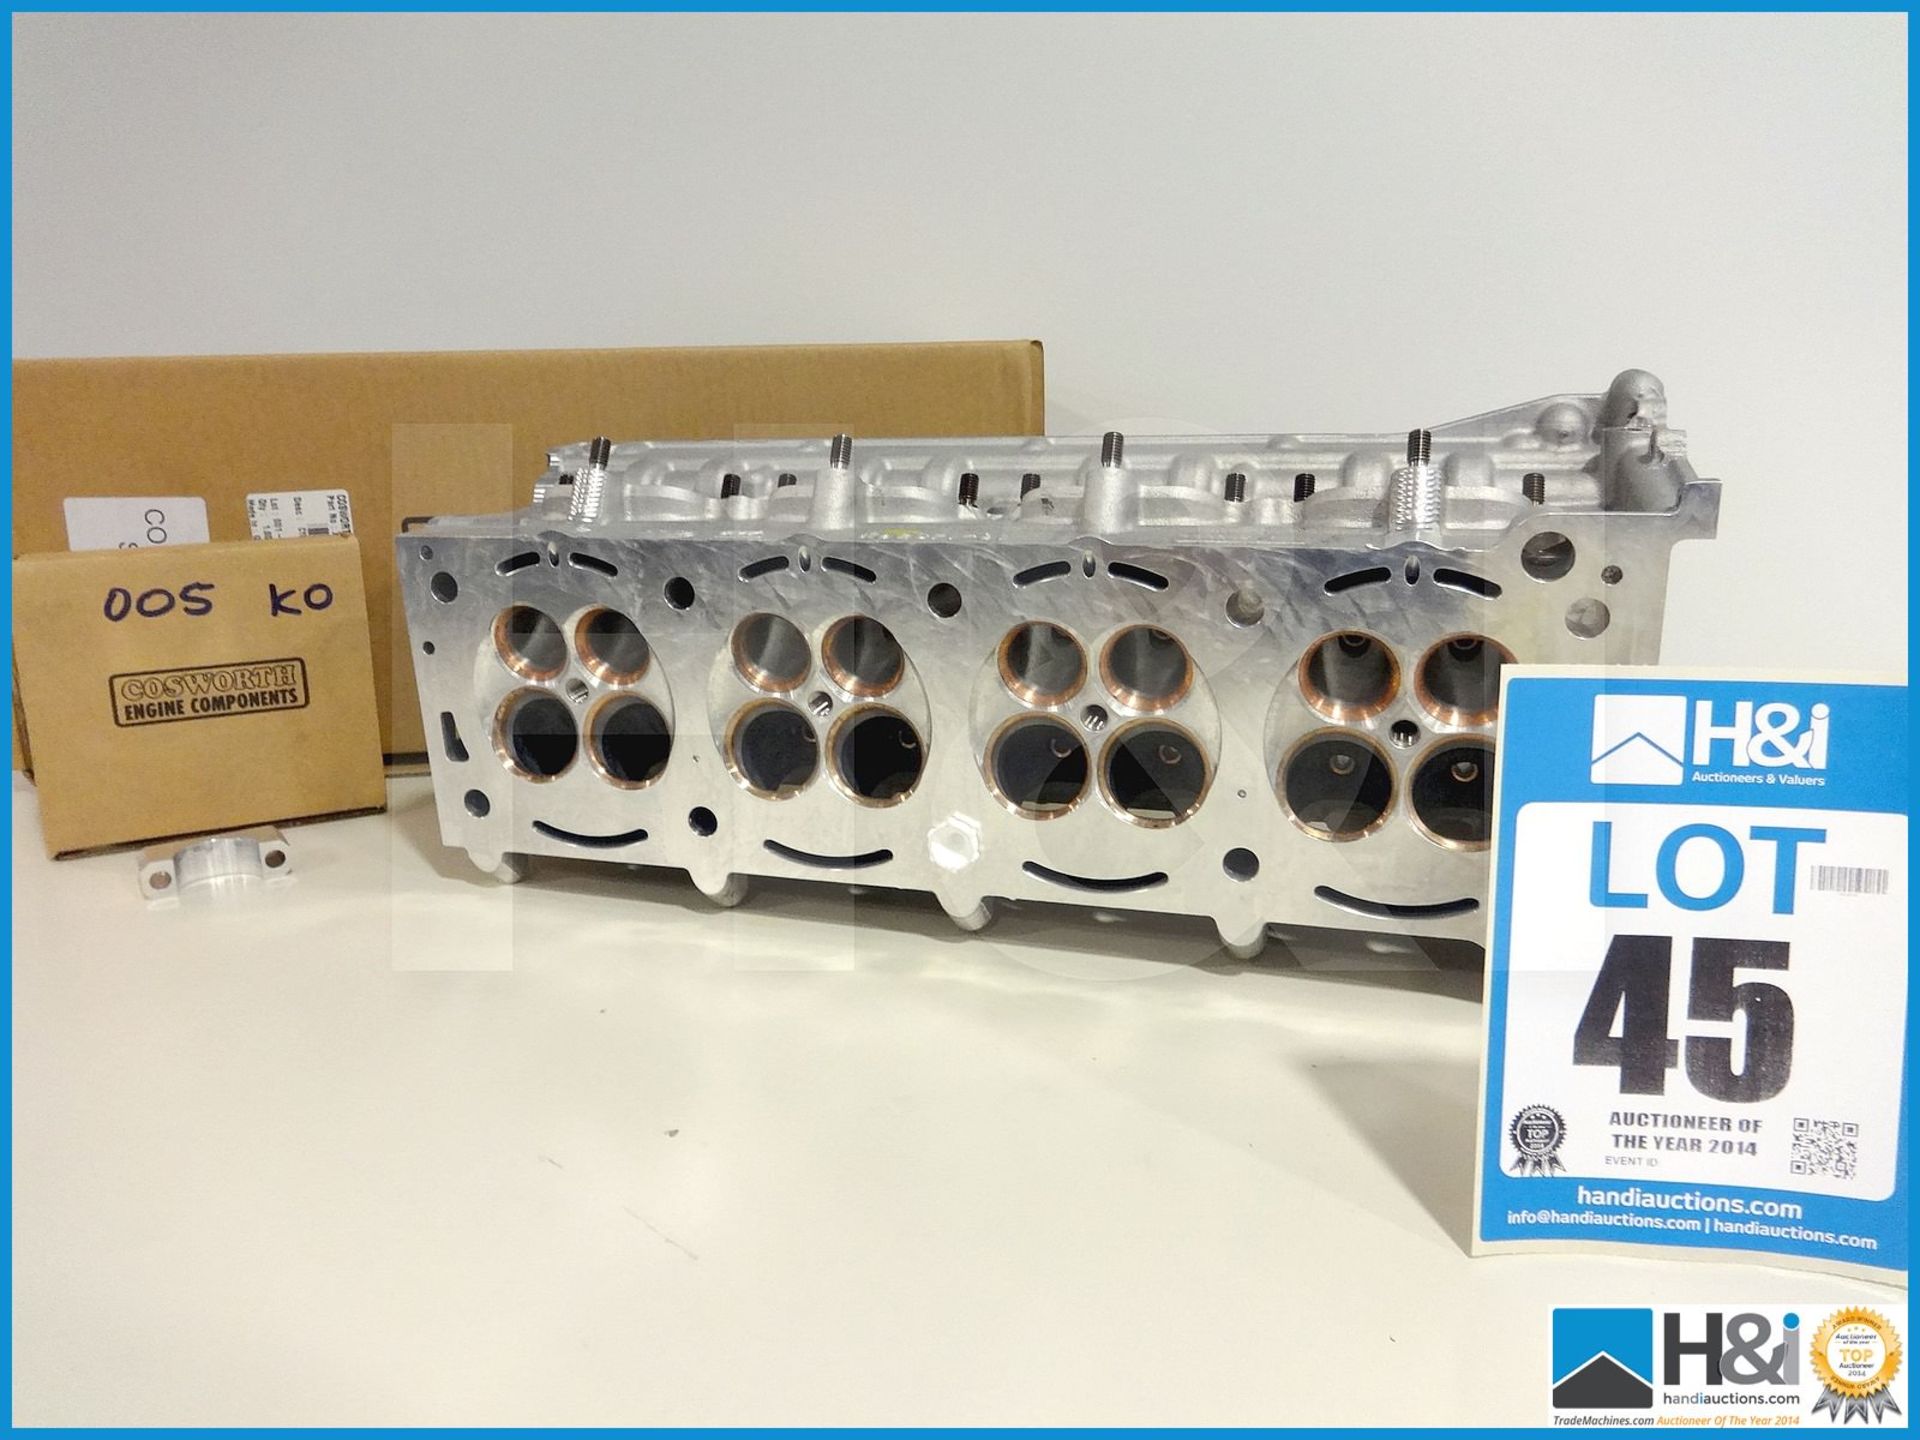 1 off Cosworth XG LH cylinder head assembly - shallow. Valued at over GBP 10,000. MC: XG8639 CILN: 1